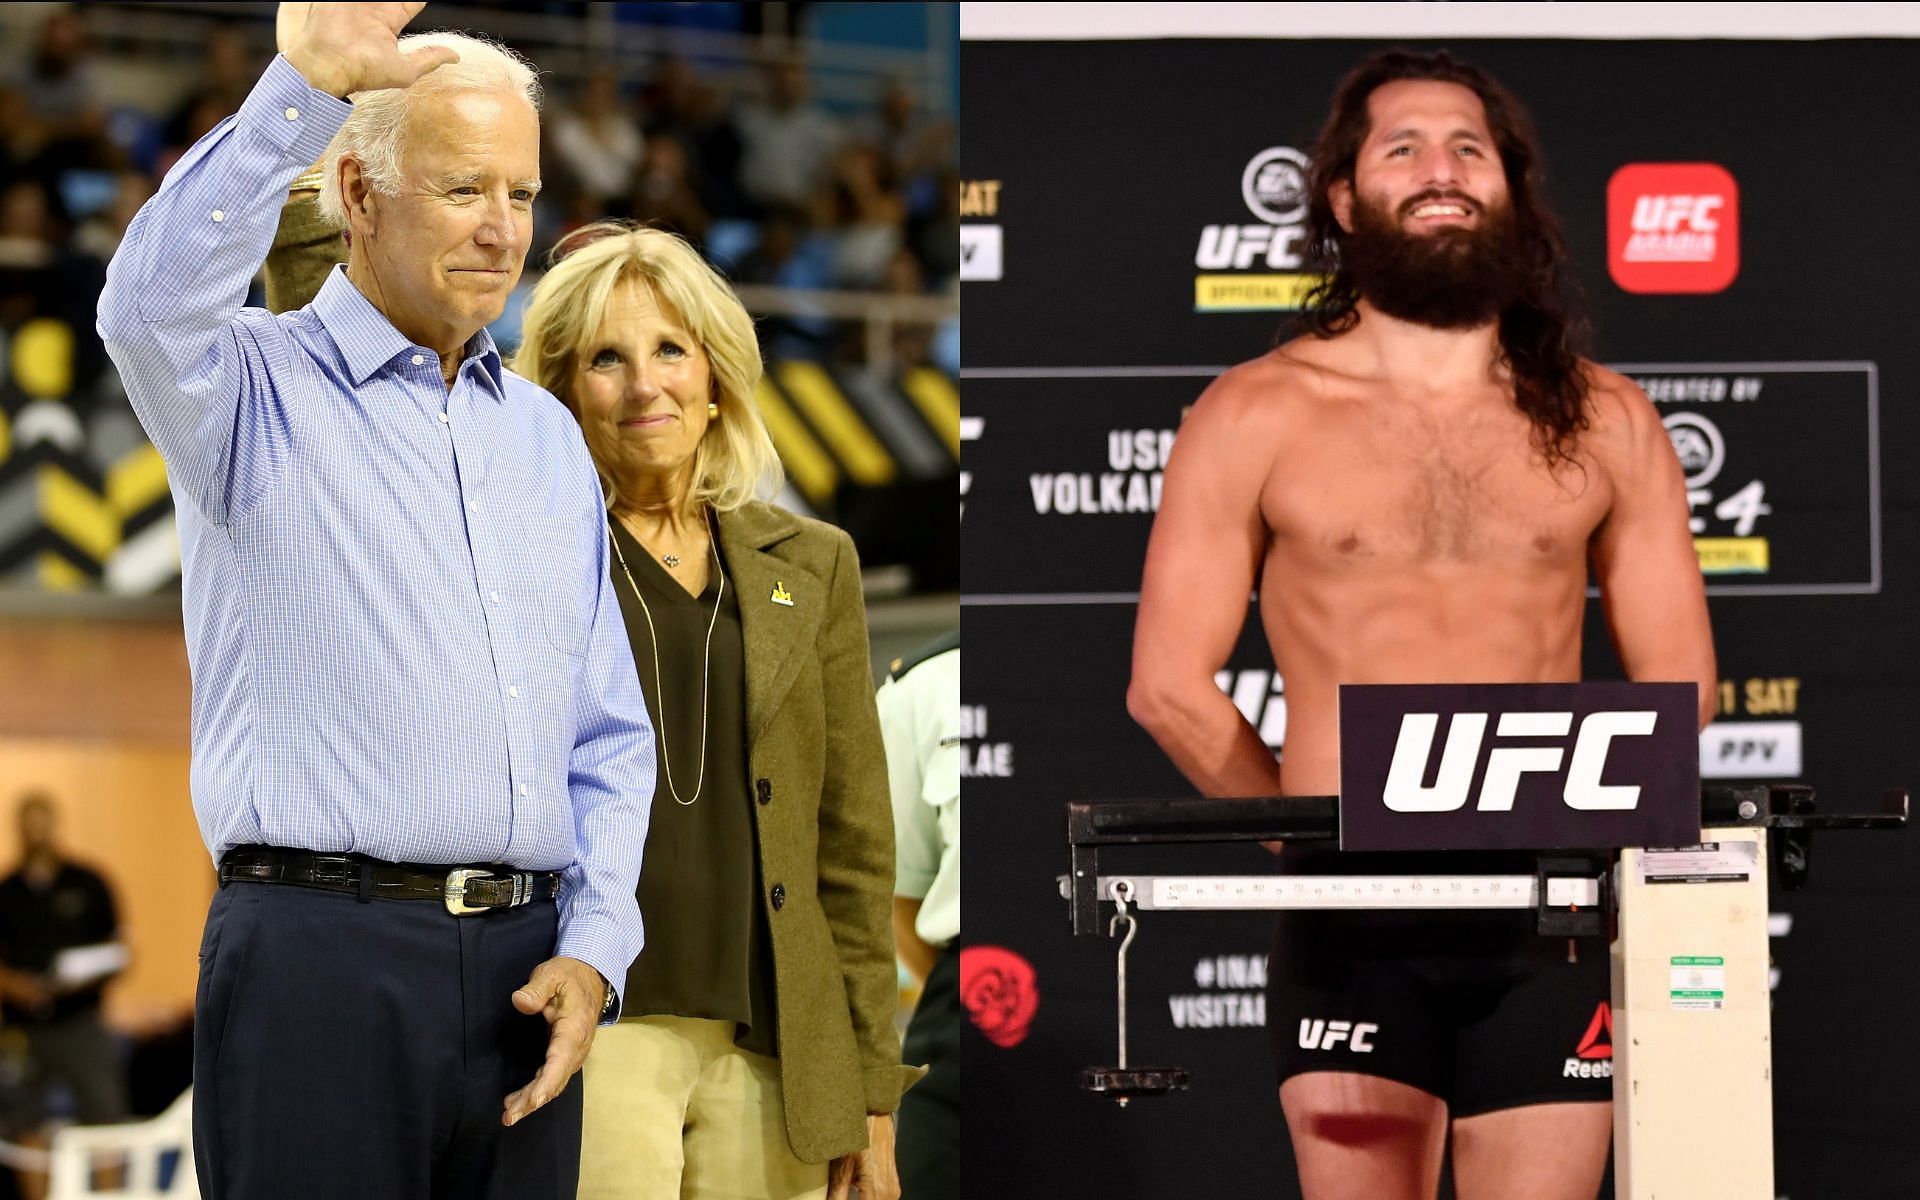 Joe Biden at an election rally (left) and Jorge Masvidal at a UFC pay-per-view&#039;s weigh-in (right)